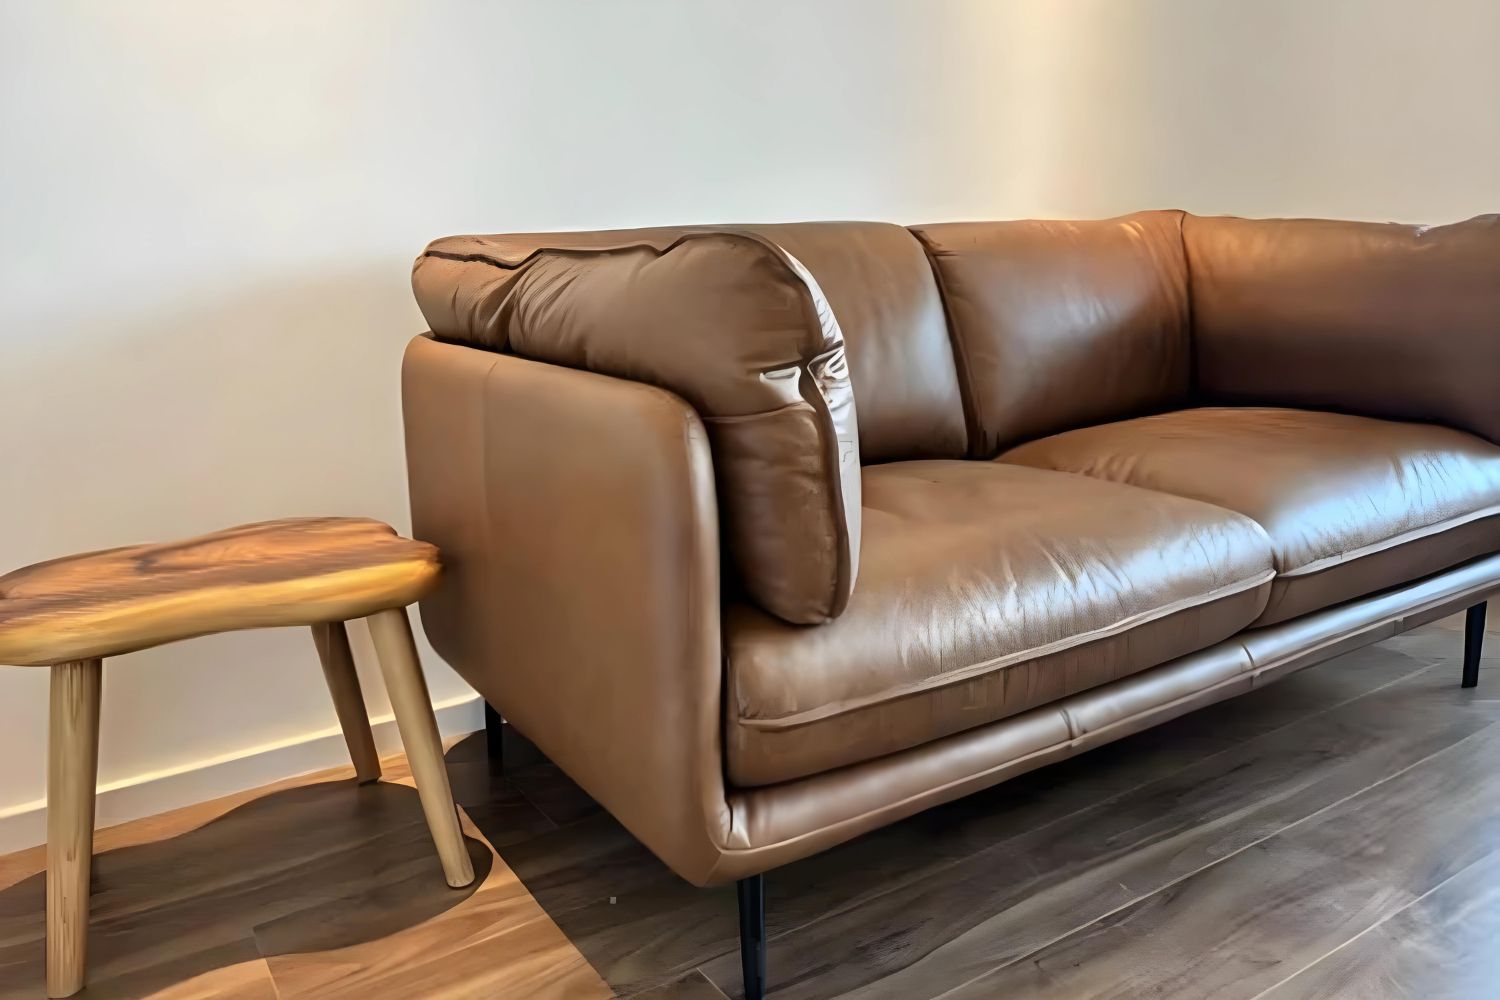 Cuddle brown half leather sofa in customer's home